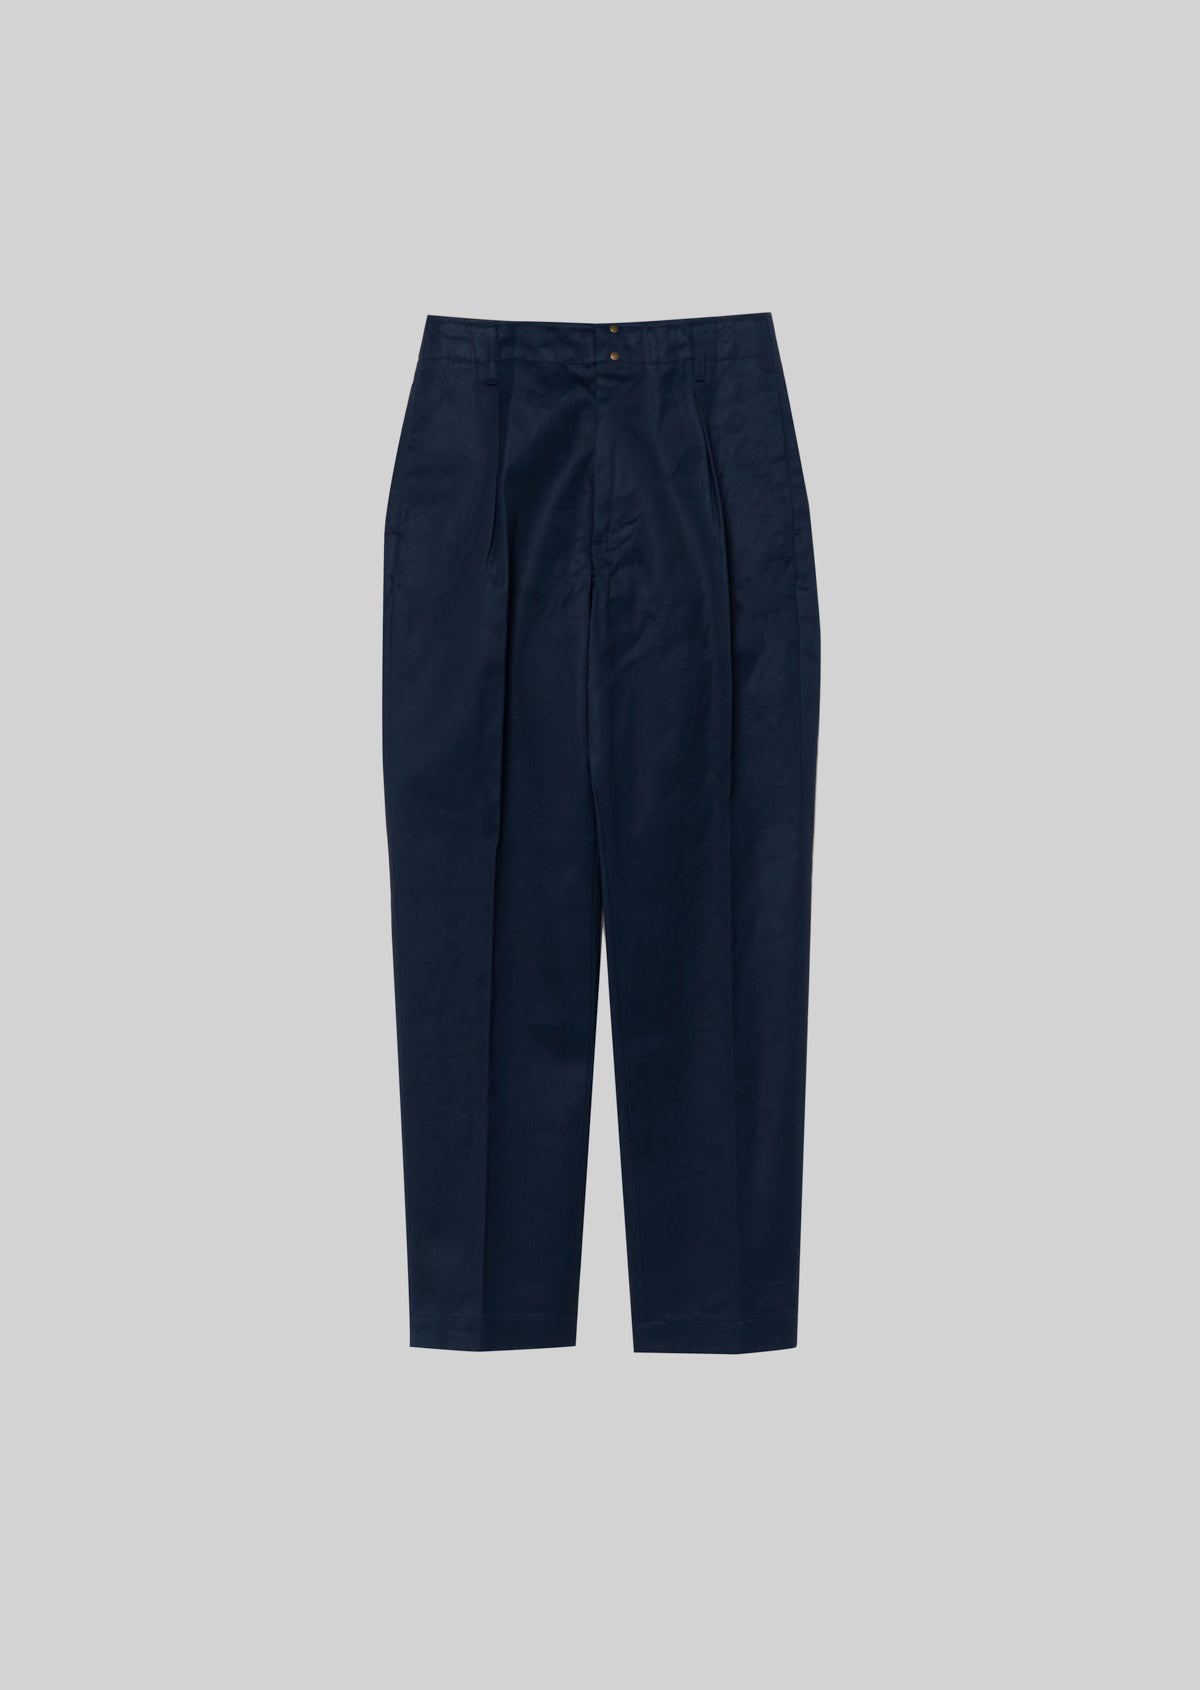 CHINO TROUSERS NAVY 8281-1400 – HANDROOM - Official Store